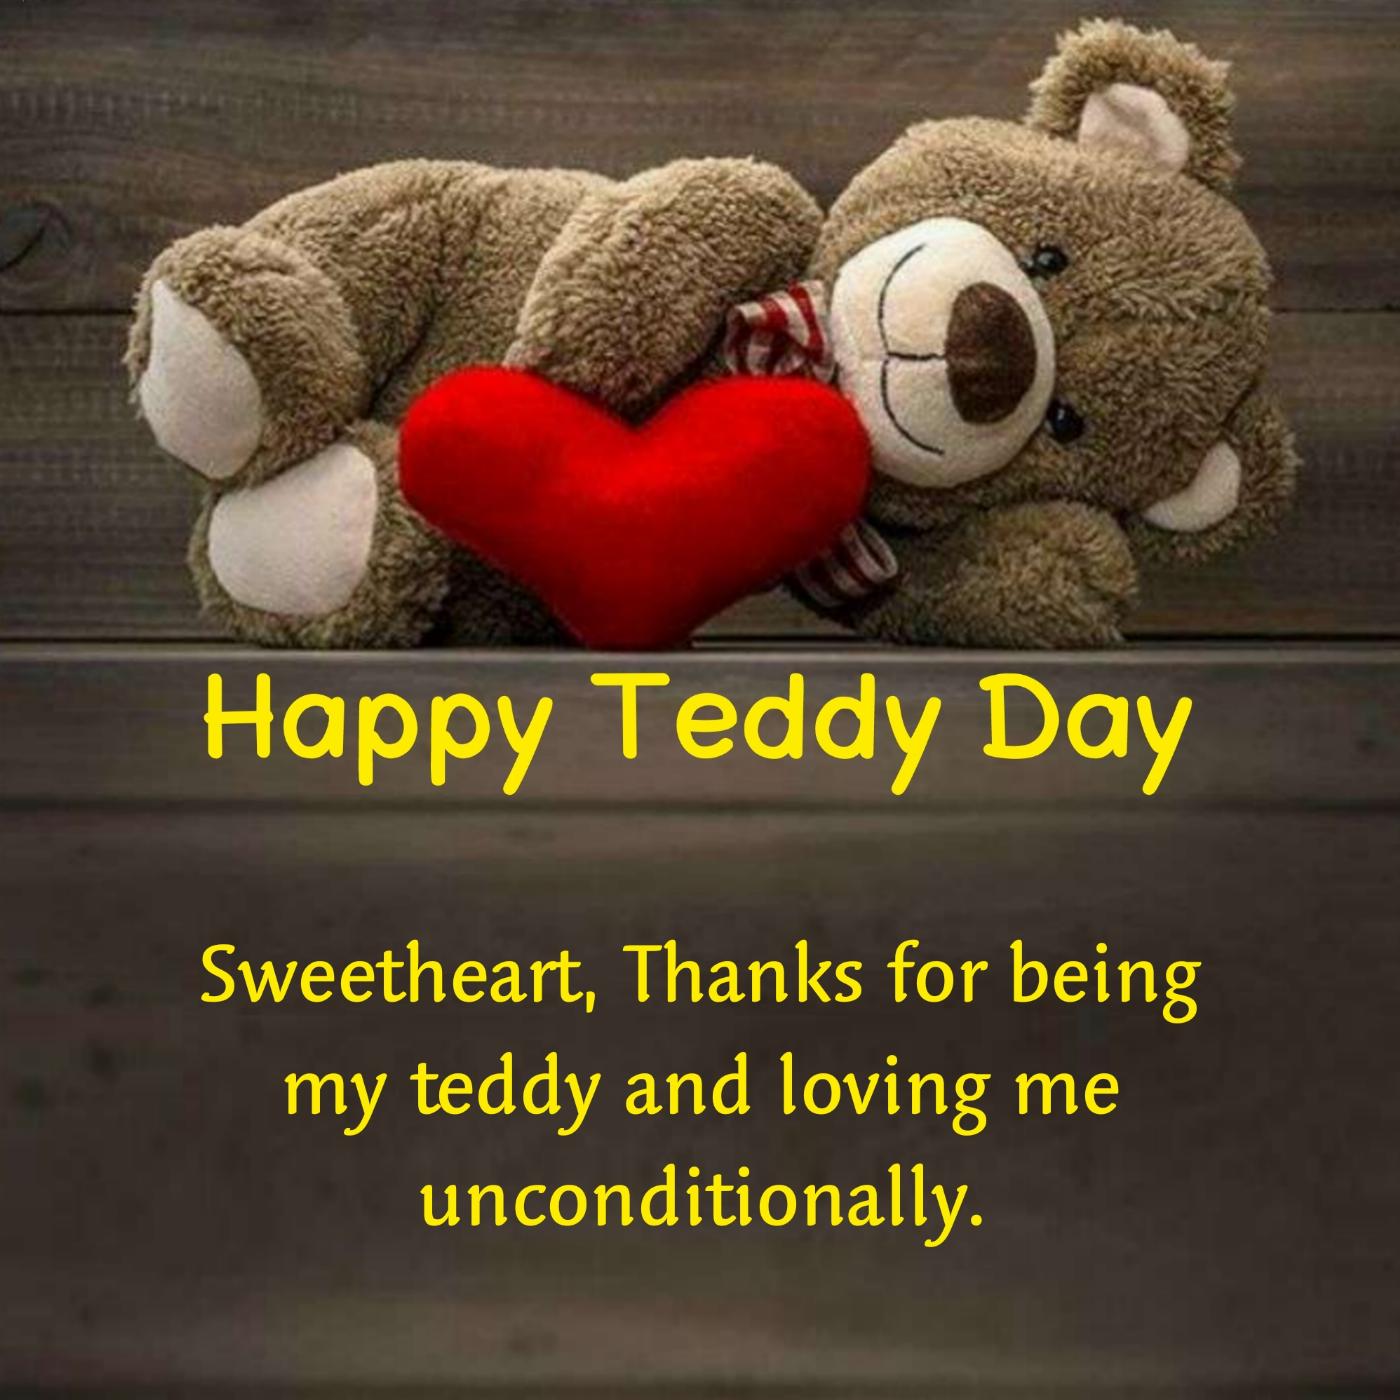 Sweetheart Thanks for being my teddy and loving me unconditionally